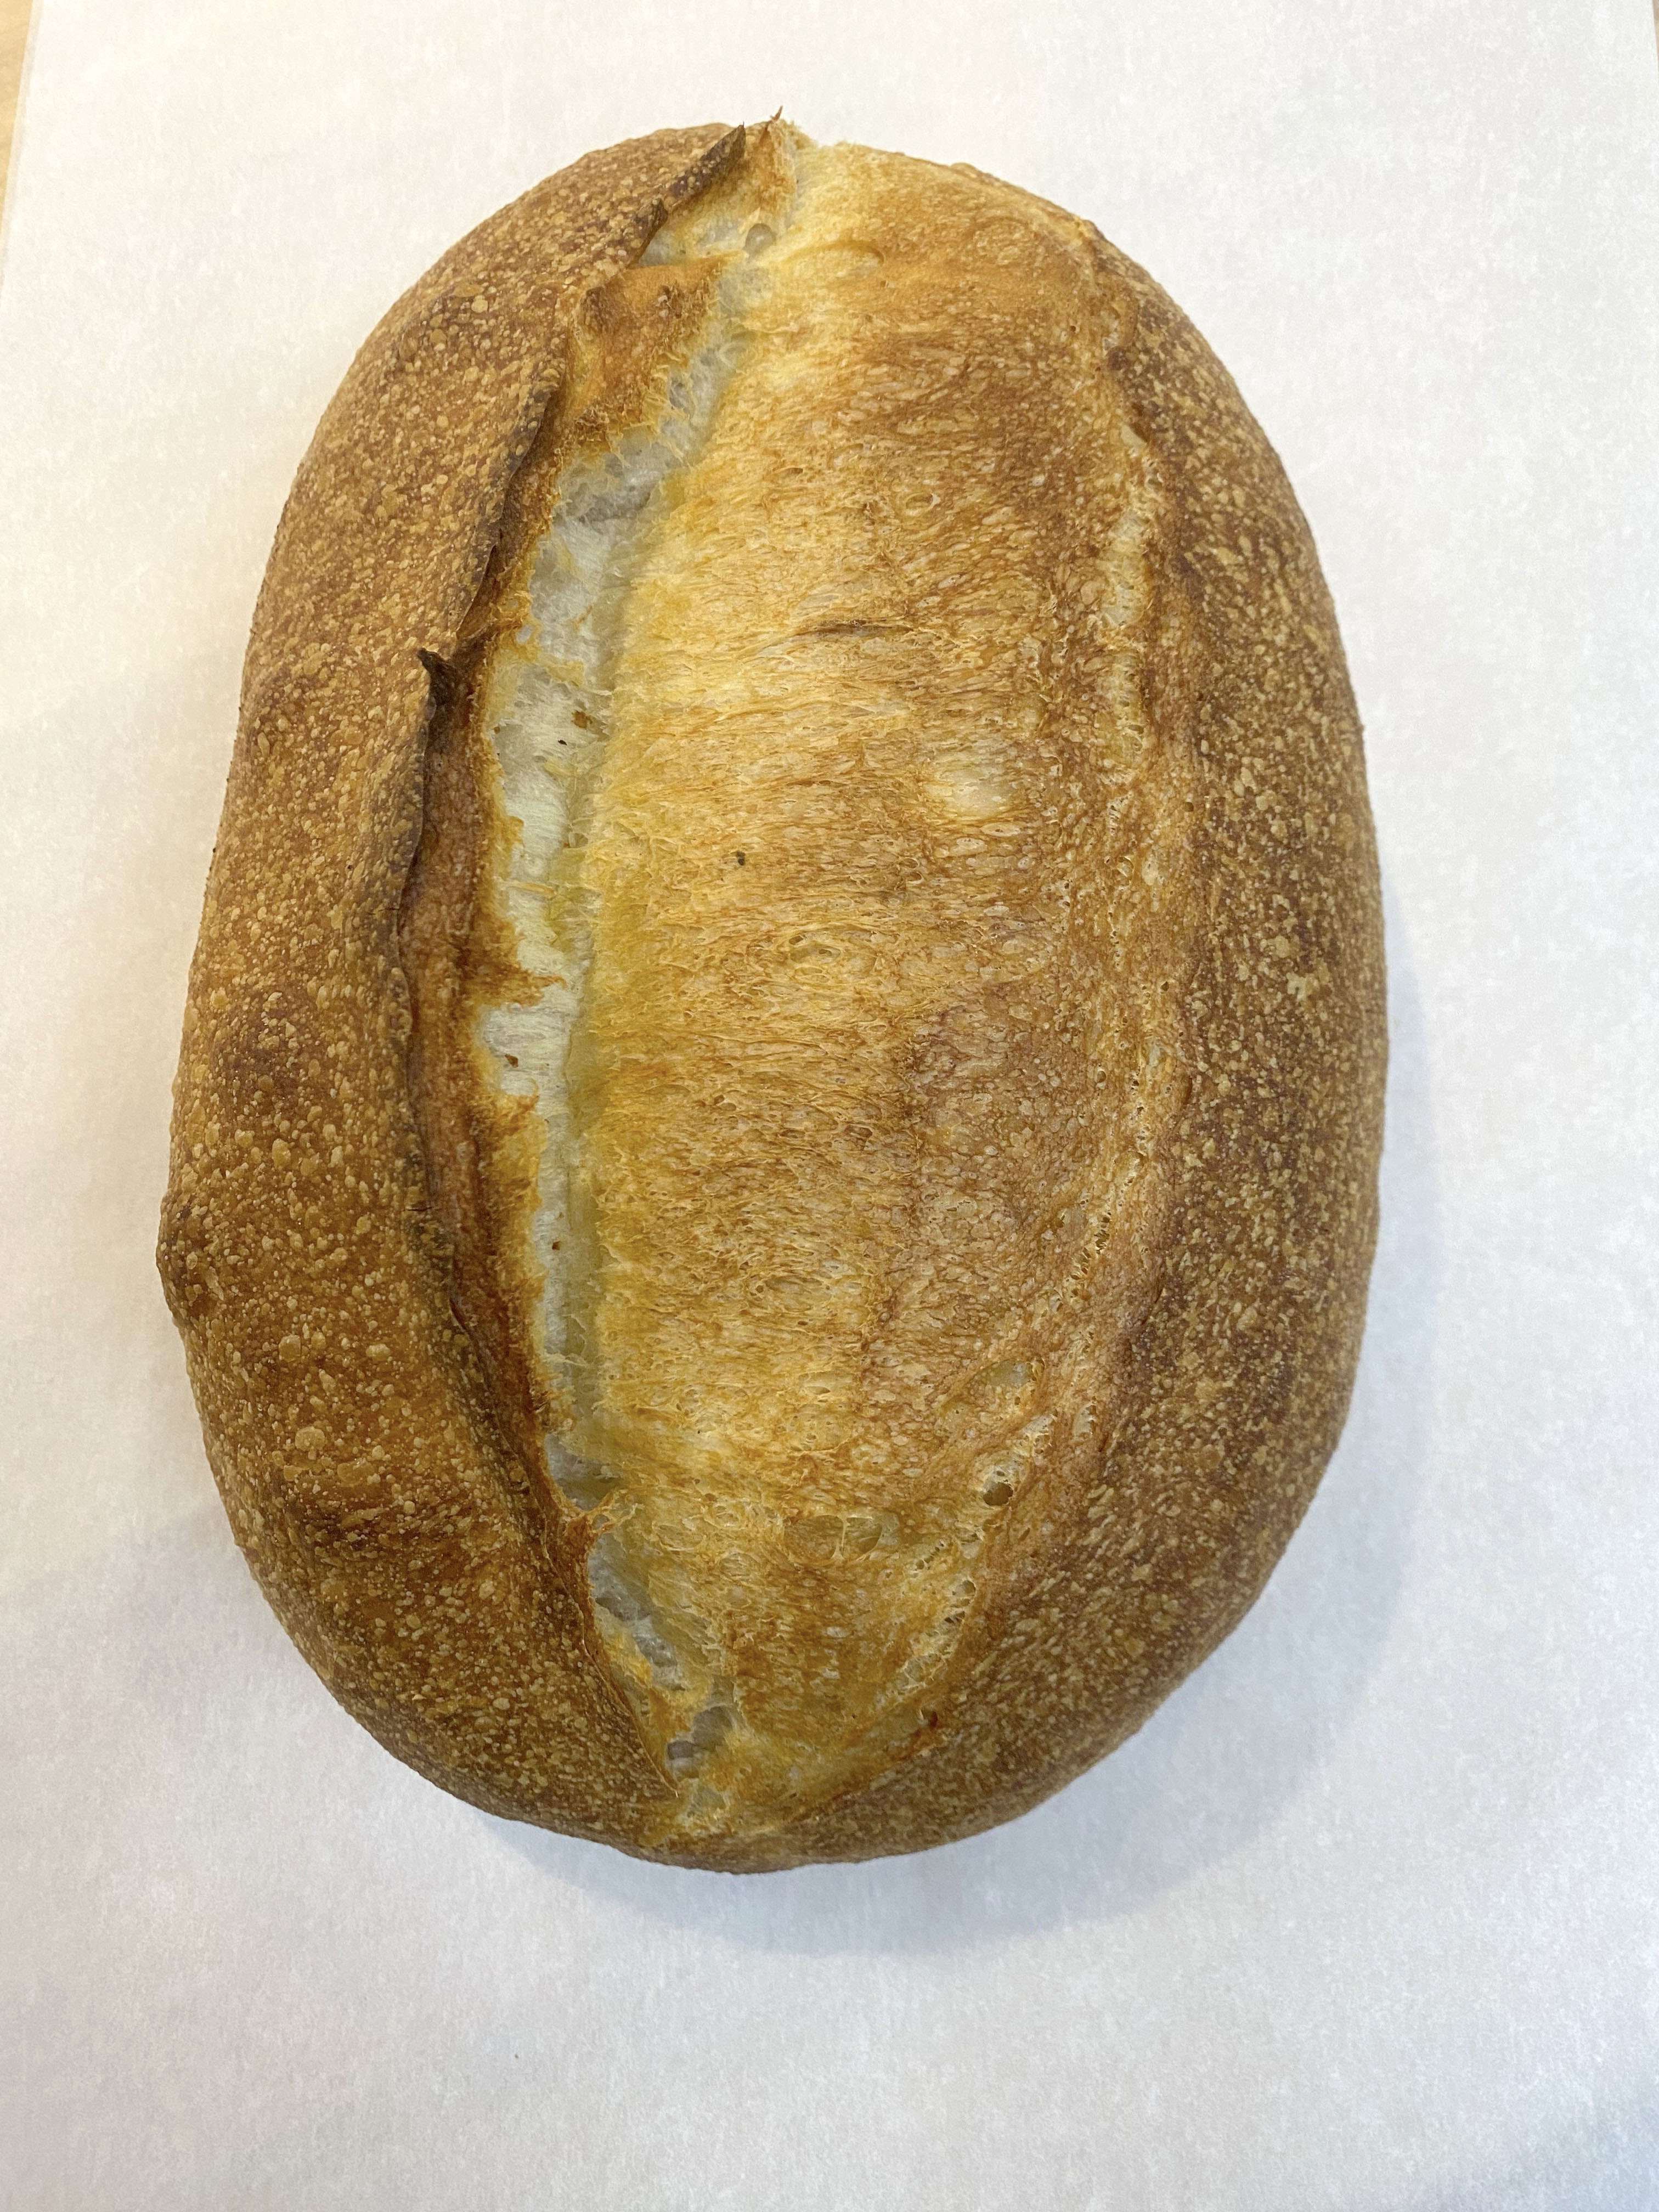 A Brio sour French loaf